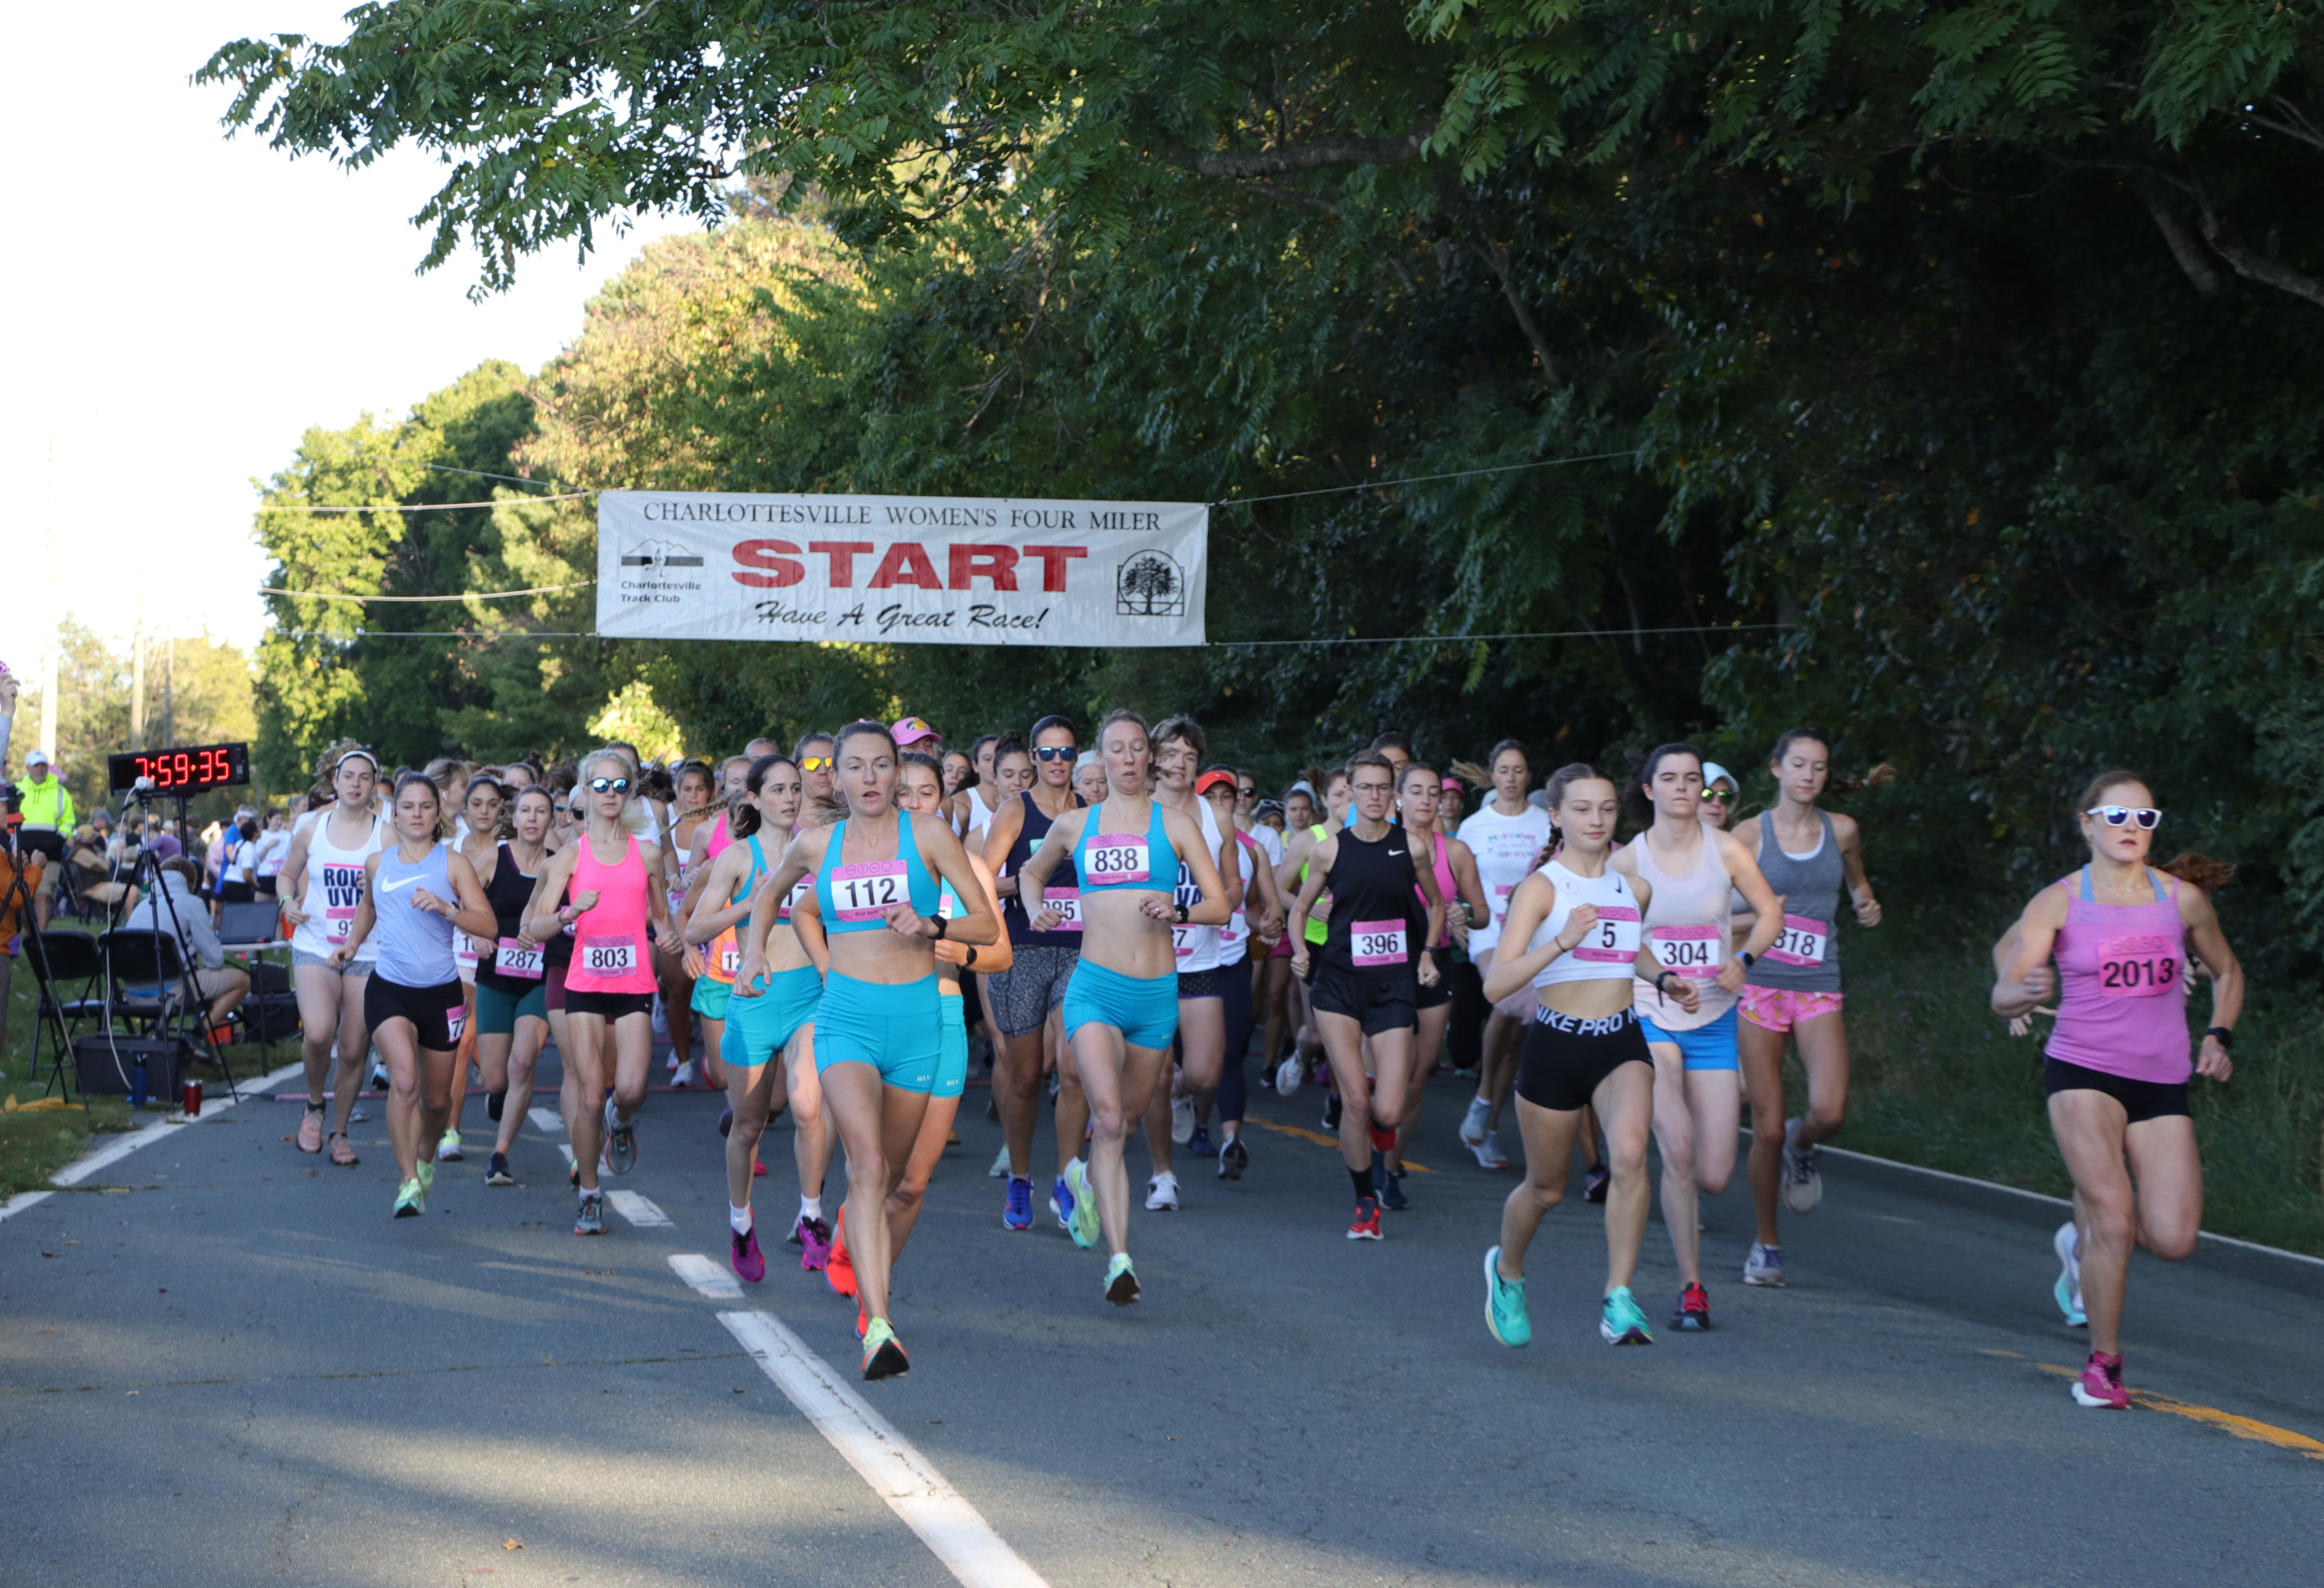 a group of women running as seen from the start line of the race